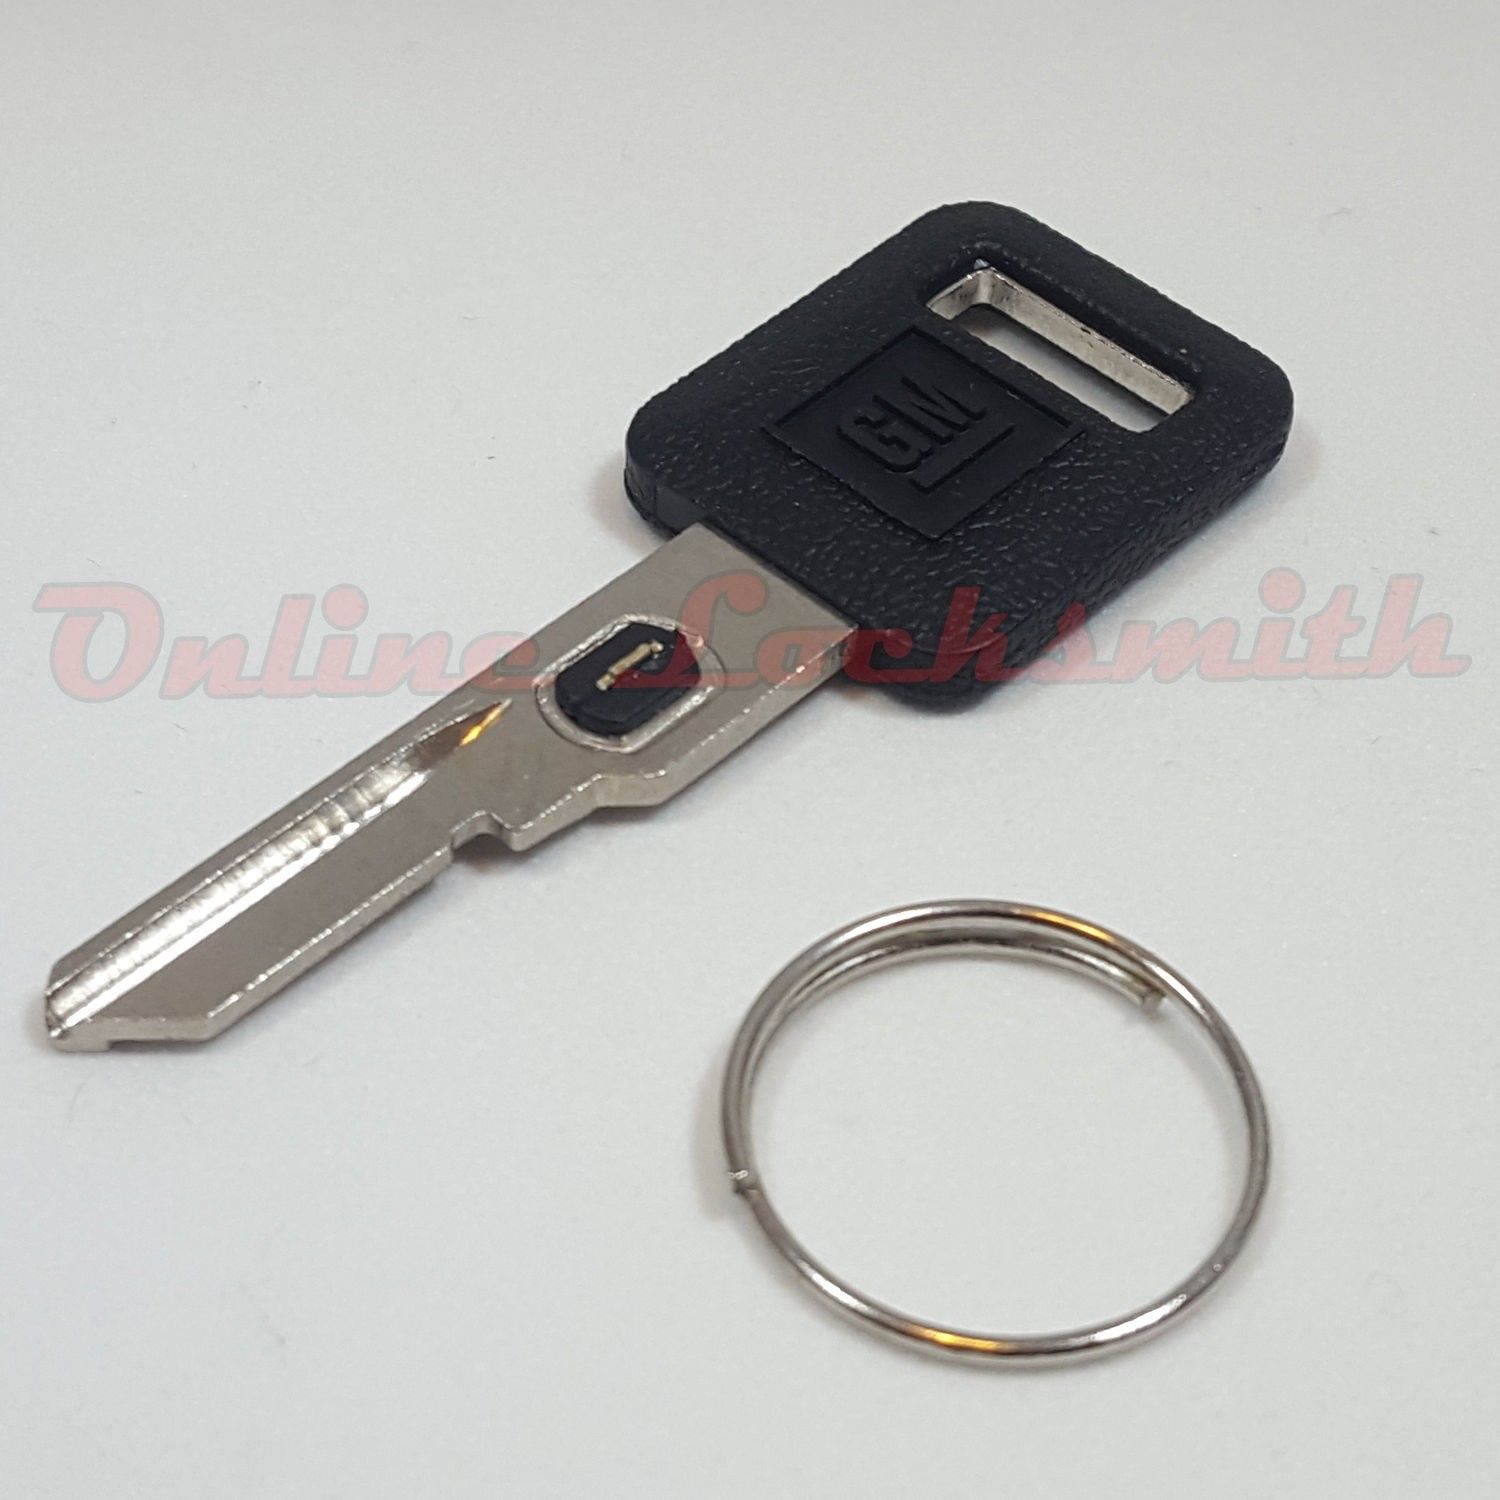 NEW GM Double Sided VATS Ignition Key #15 MADE IN USA Doors/Trunk OEM Key